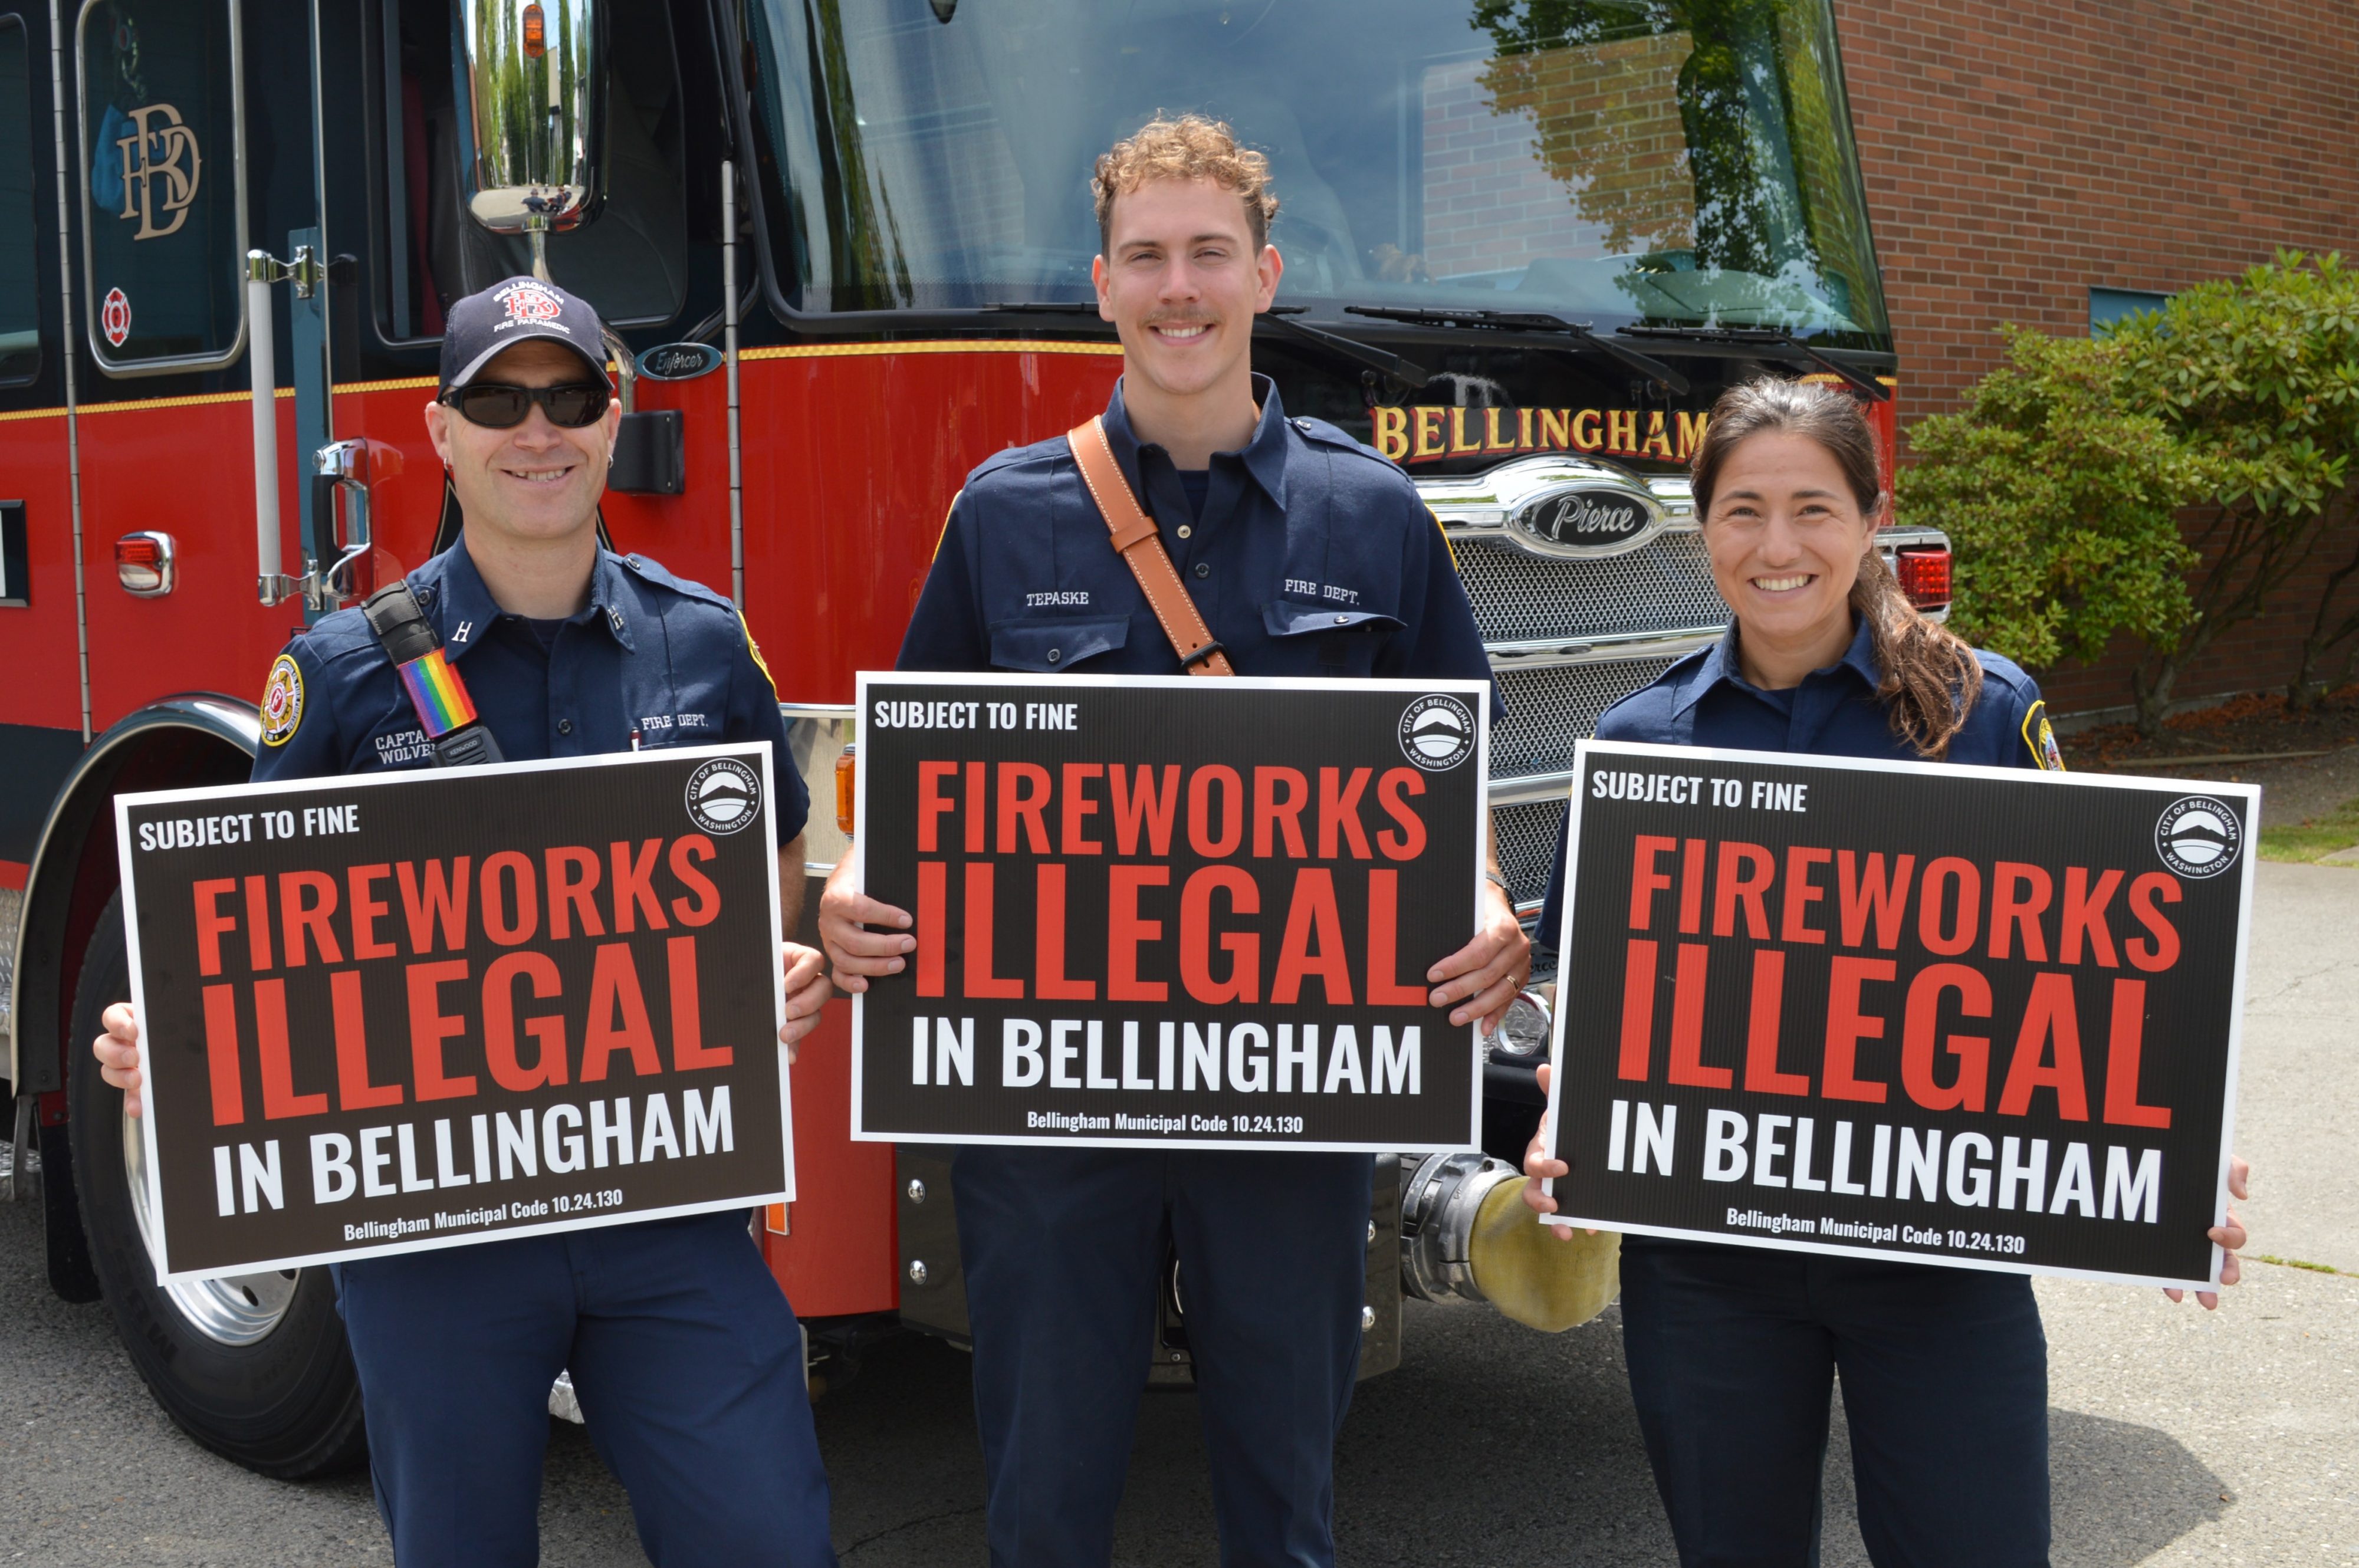 Three firefighters standing in front of a firetruck holding yard signs that read "Fireworks Illegal In Bellingham, subject to fine. Bellingham Municipal Code 10.24.130"